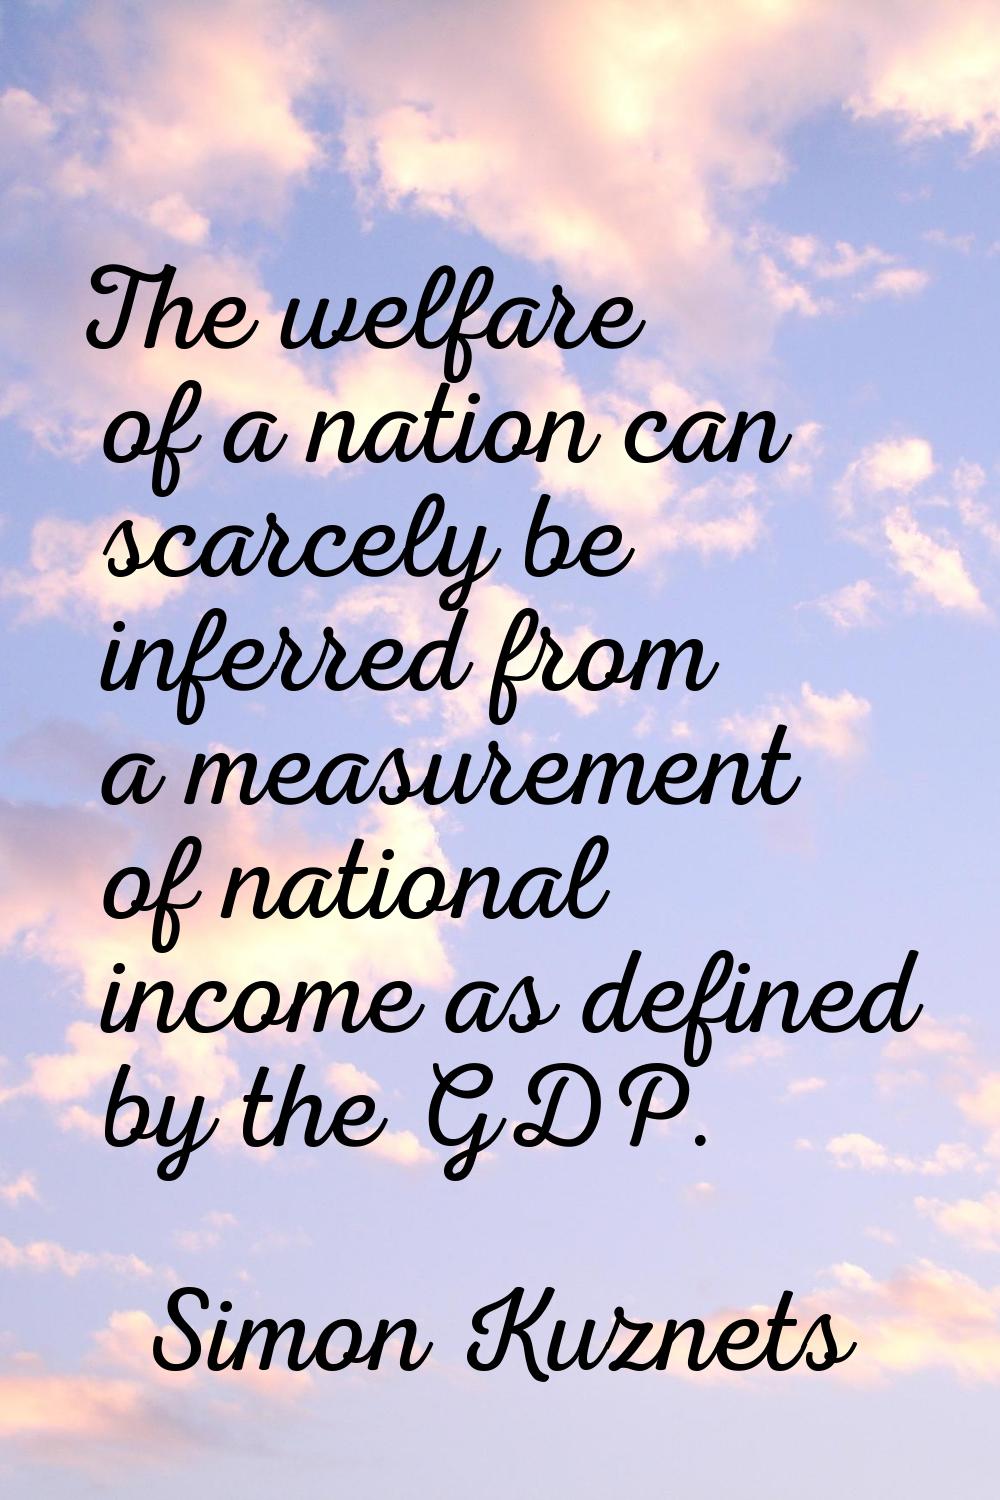 The welfare of a nation can scarcely be inferred from a measurement of national income as defined b